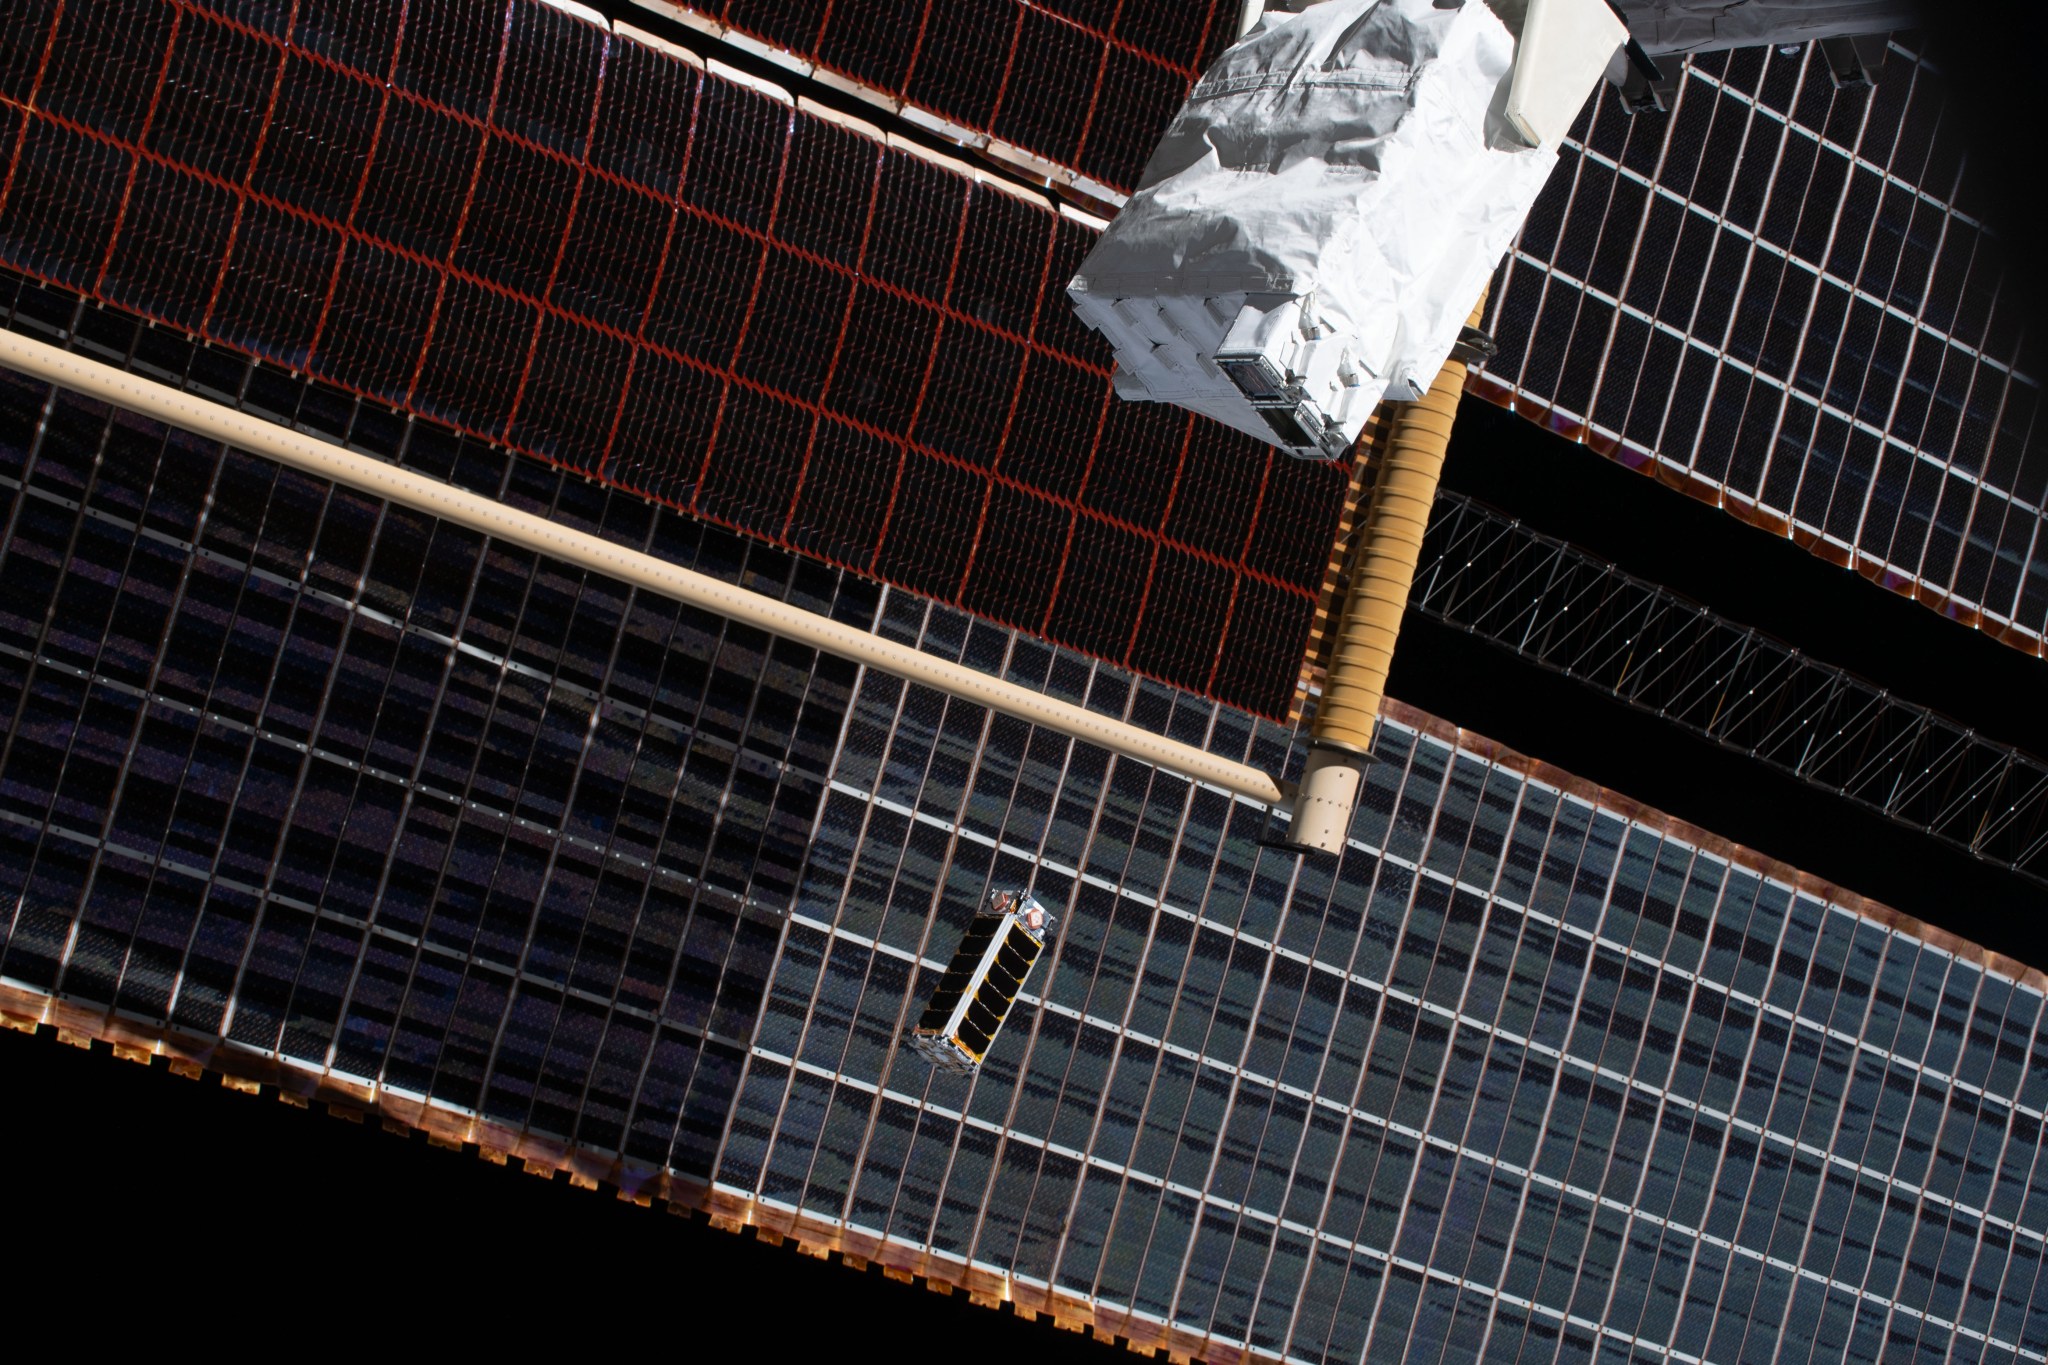 The BEAK CubeSat is deployed from a small satellie deployer in the grips of the Japanese robotic arm attached to the Kibo laboratory module. BEAK, launched to the Interational Space Station aboard the SpaceX Dragon cargo spacecraft, was developed by The University of Tokyo in Kashiwa, Japan, and the Institute of Space and Astronautical Science in Sagamihara, Japan. Its primary mission is to test novel technologies for use in future nano-sized planetary probes.